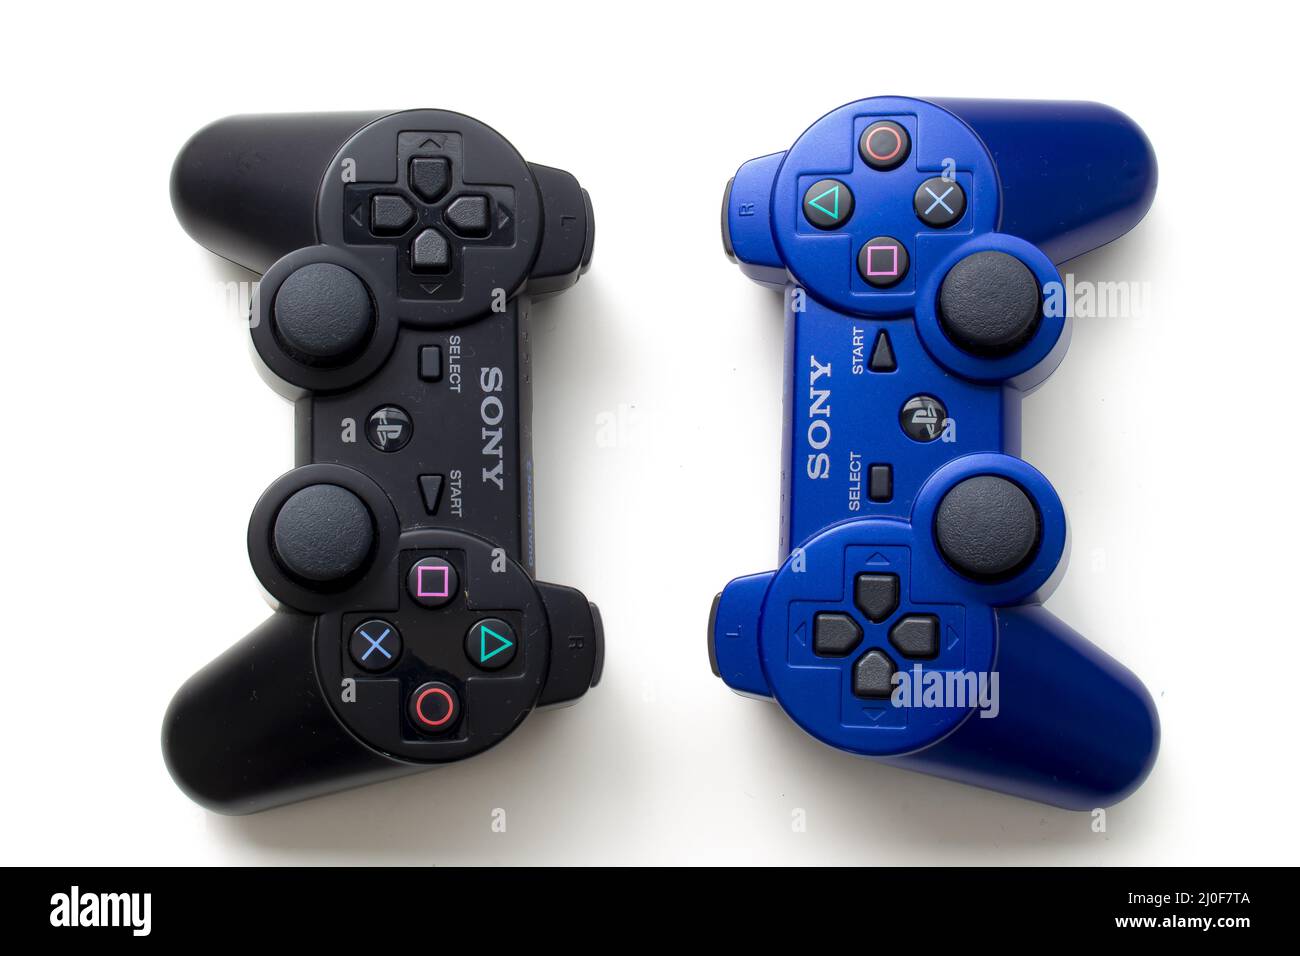 Calgary, Alberta, Canada. July 20, 2020. Black and Blue Sony Play Station control remotes on a white background Stock Photo